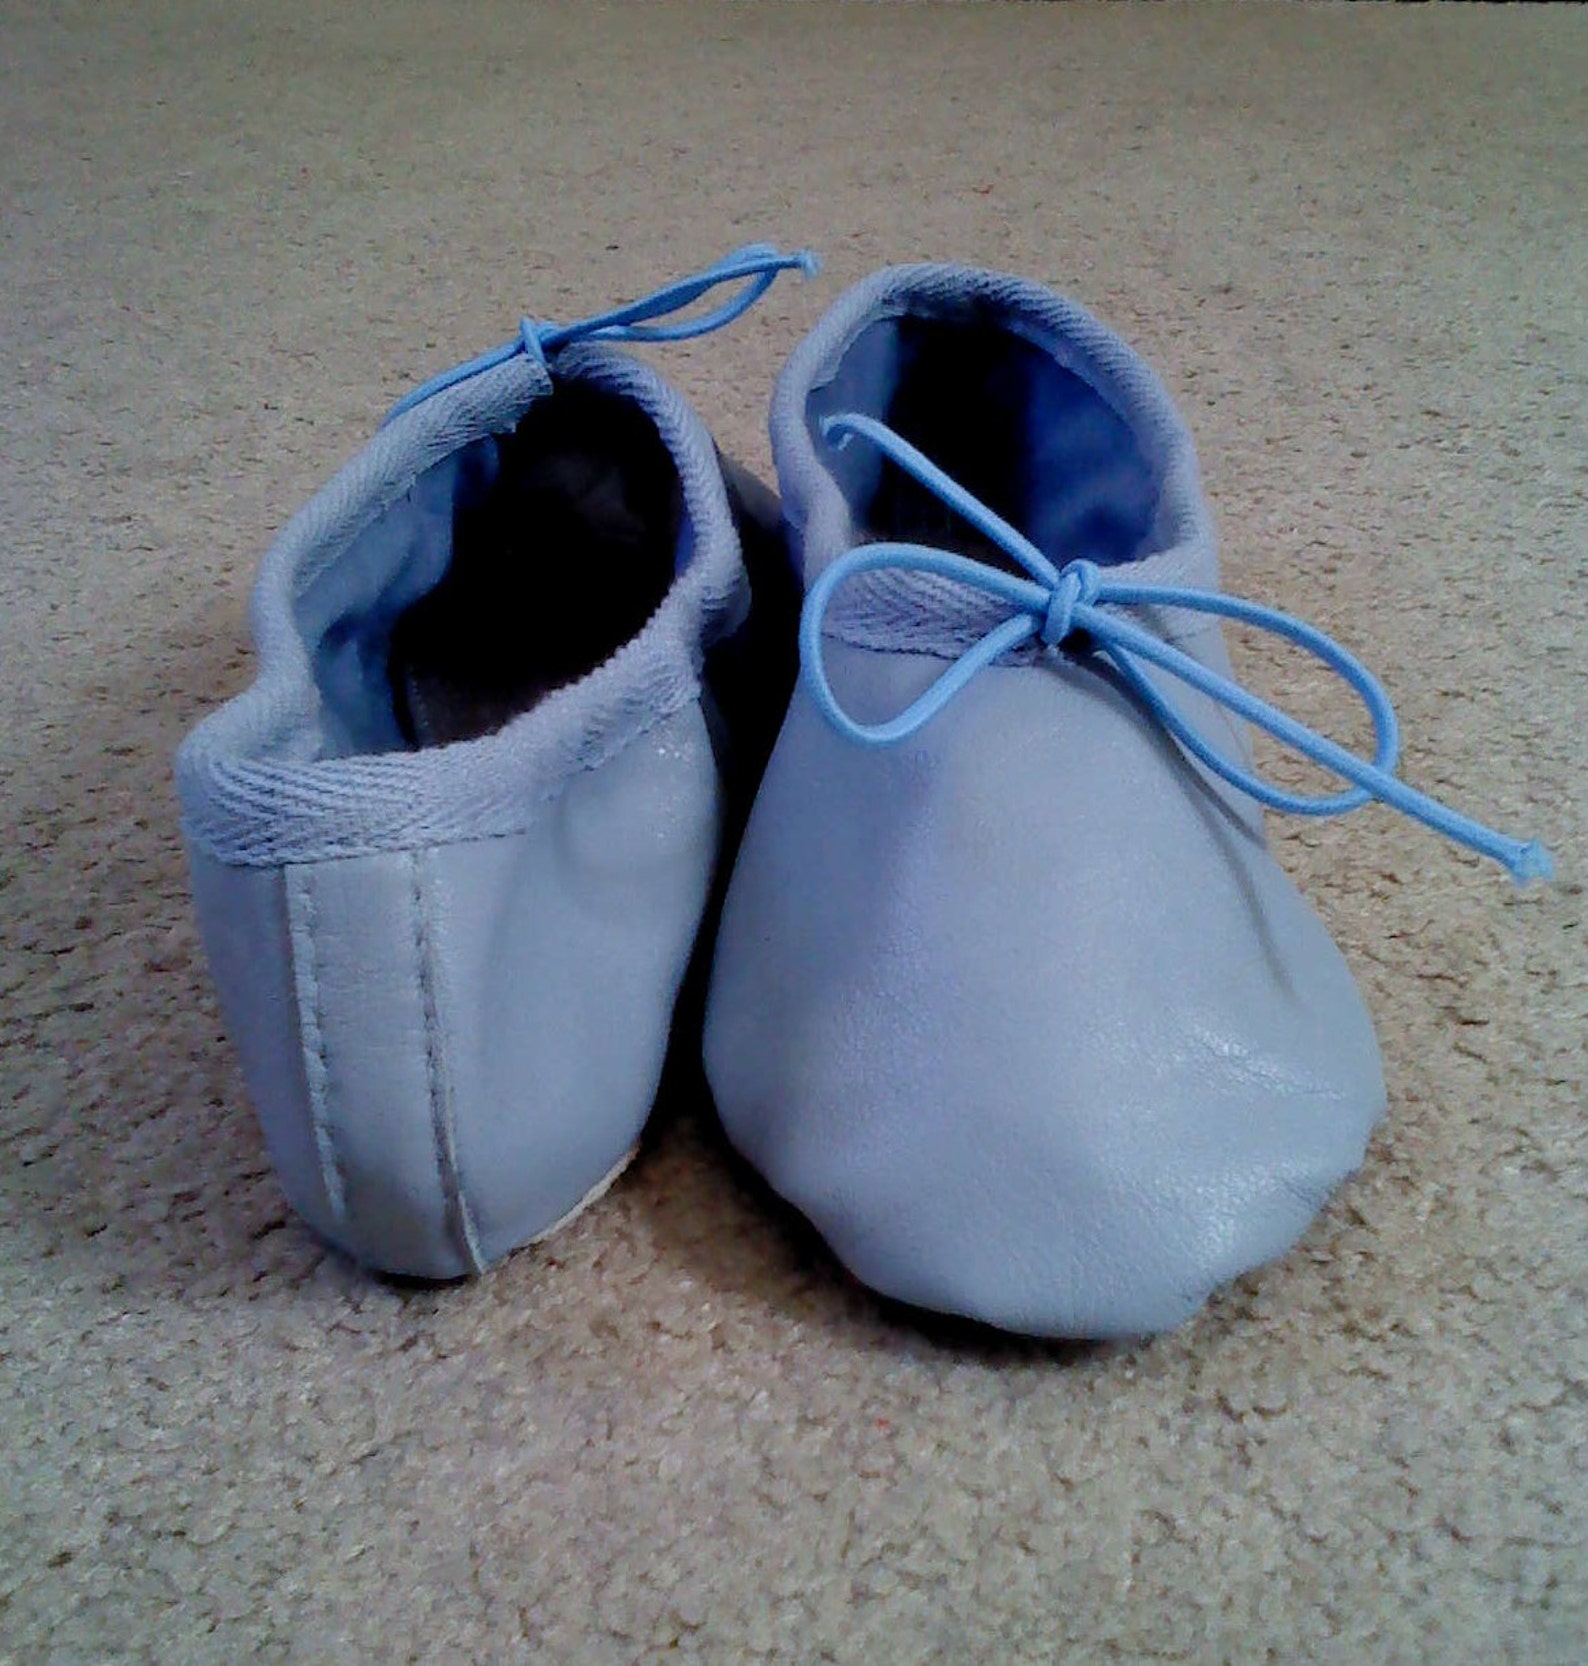 jet blue leather ballet shoes - full sole - adult sizes